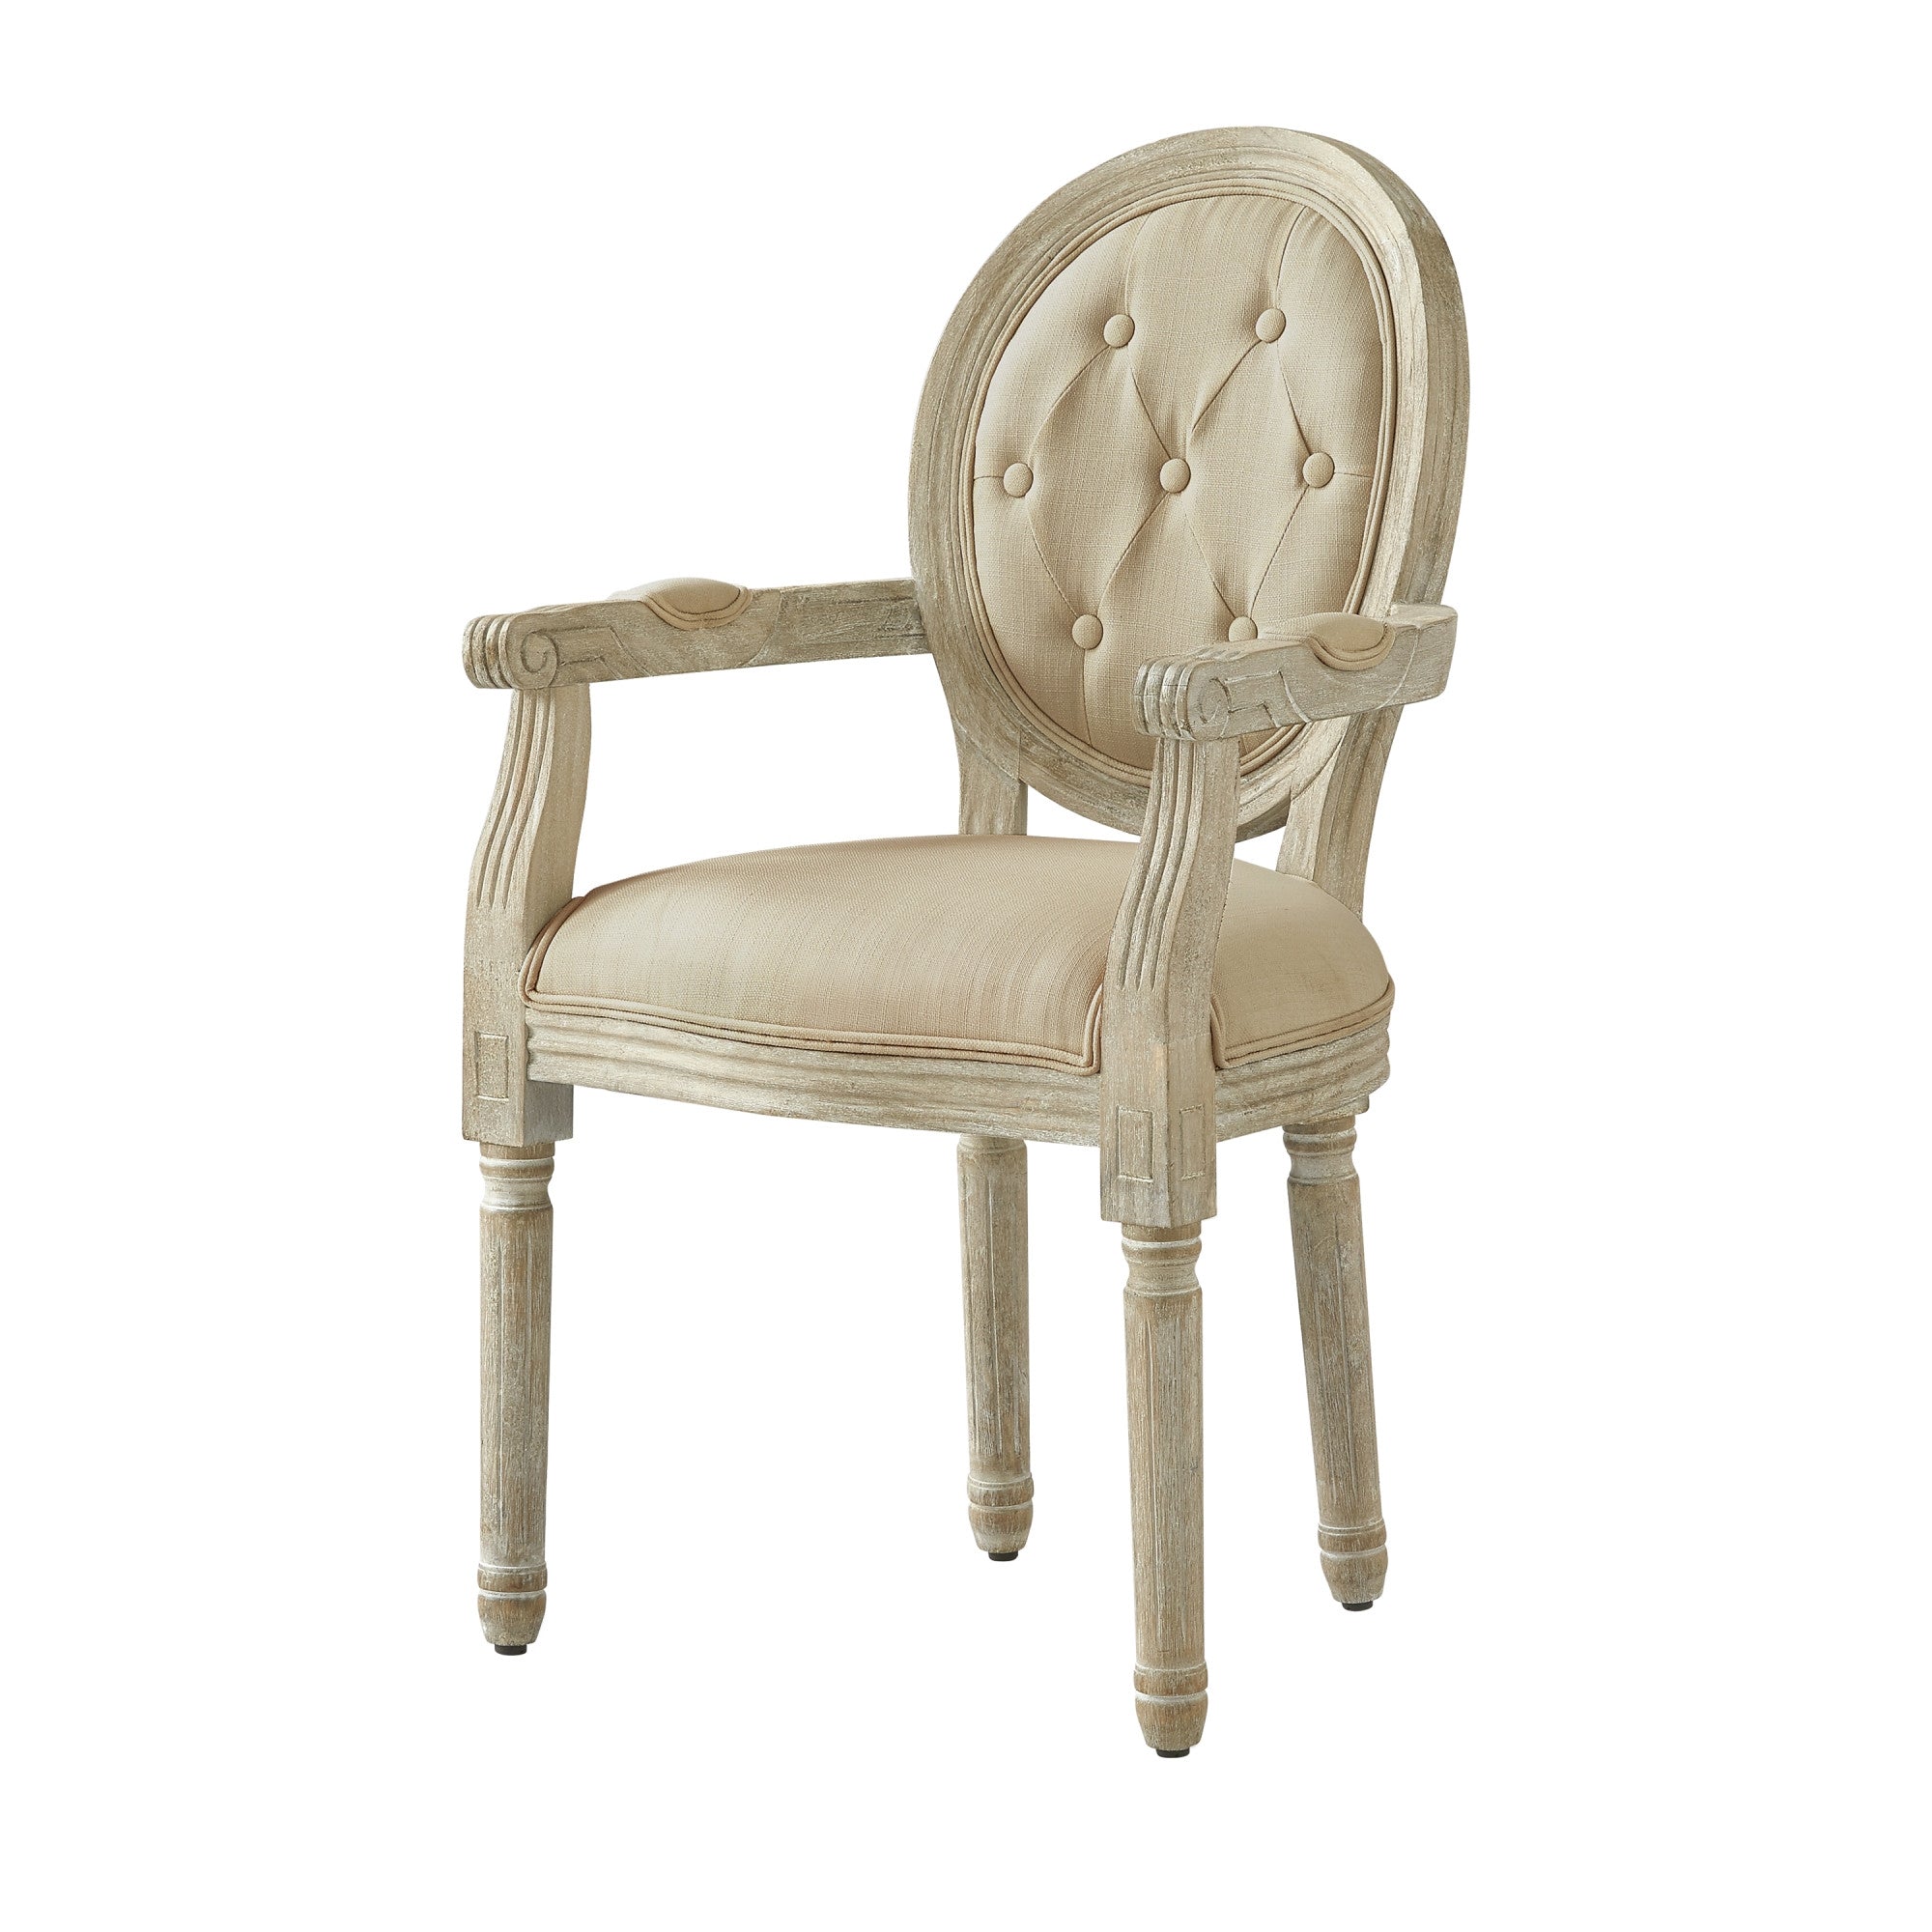 Tufted Cream and Brown Upholstered Linen Dining Arm Chair